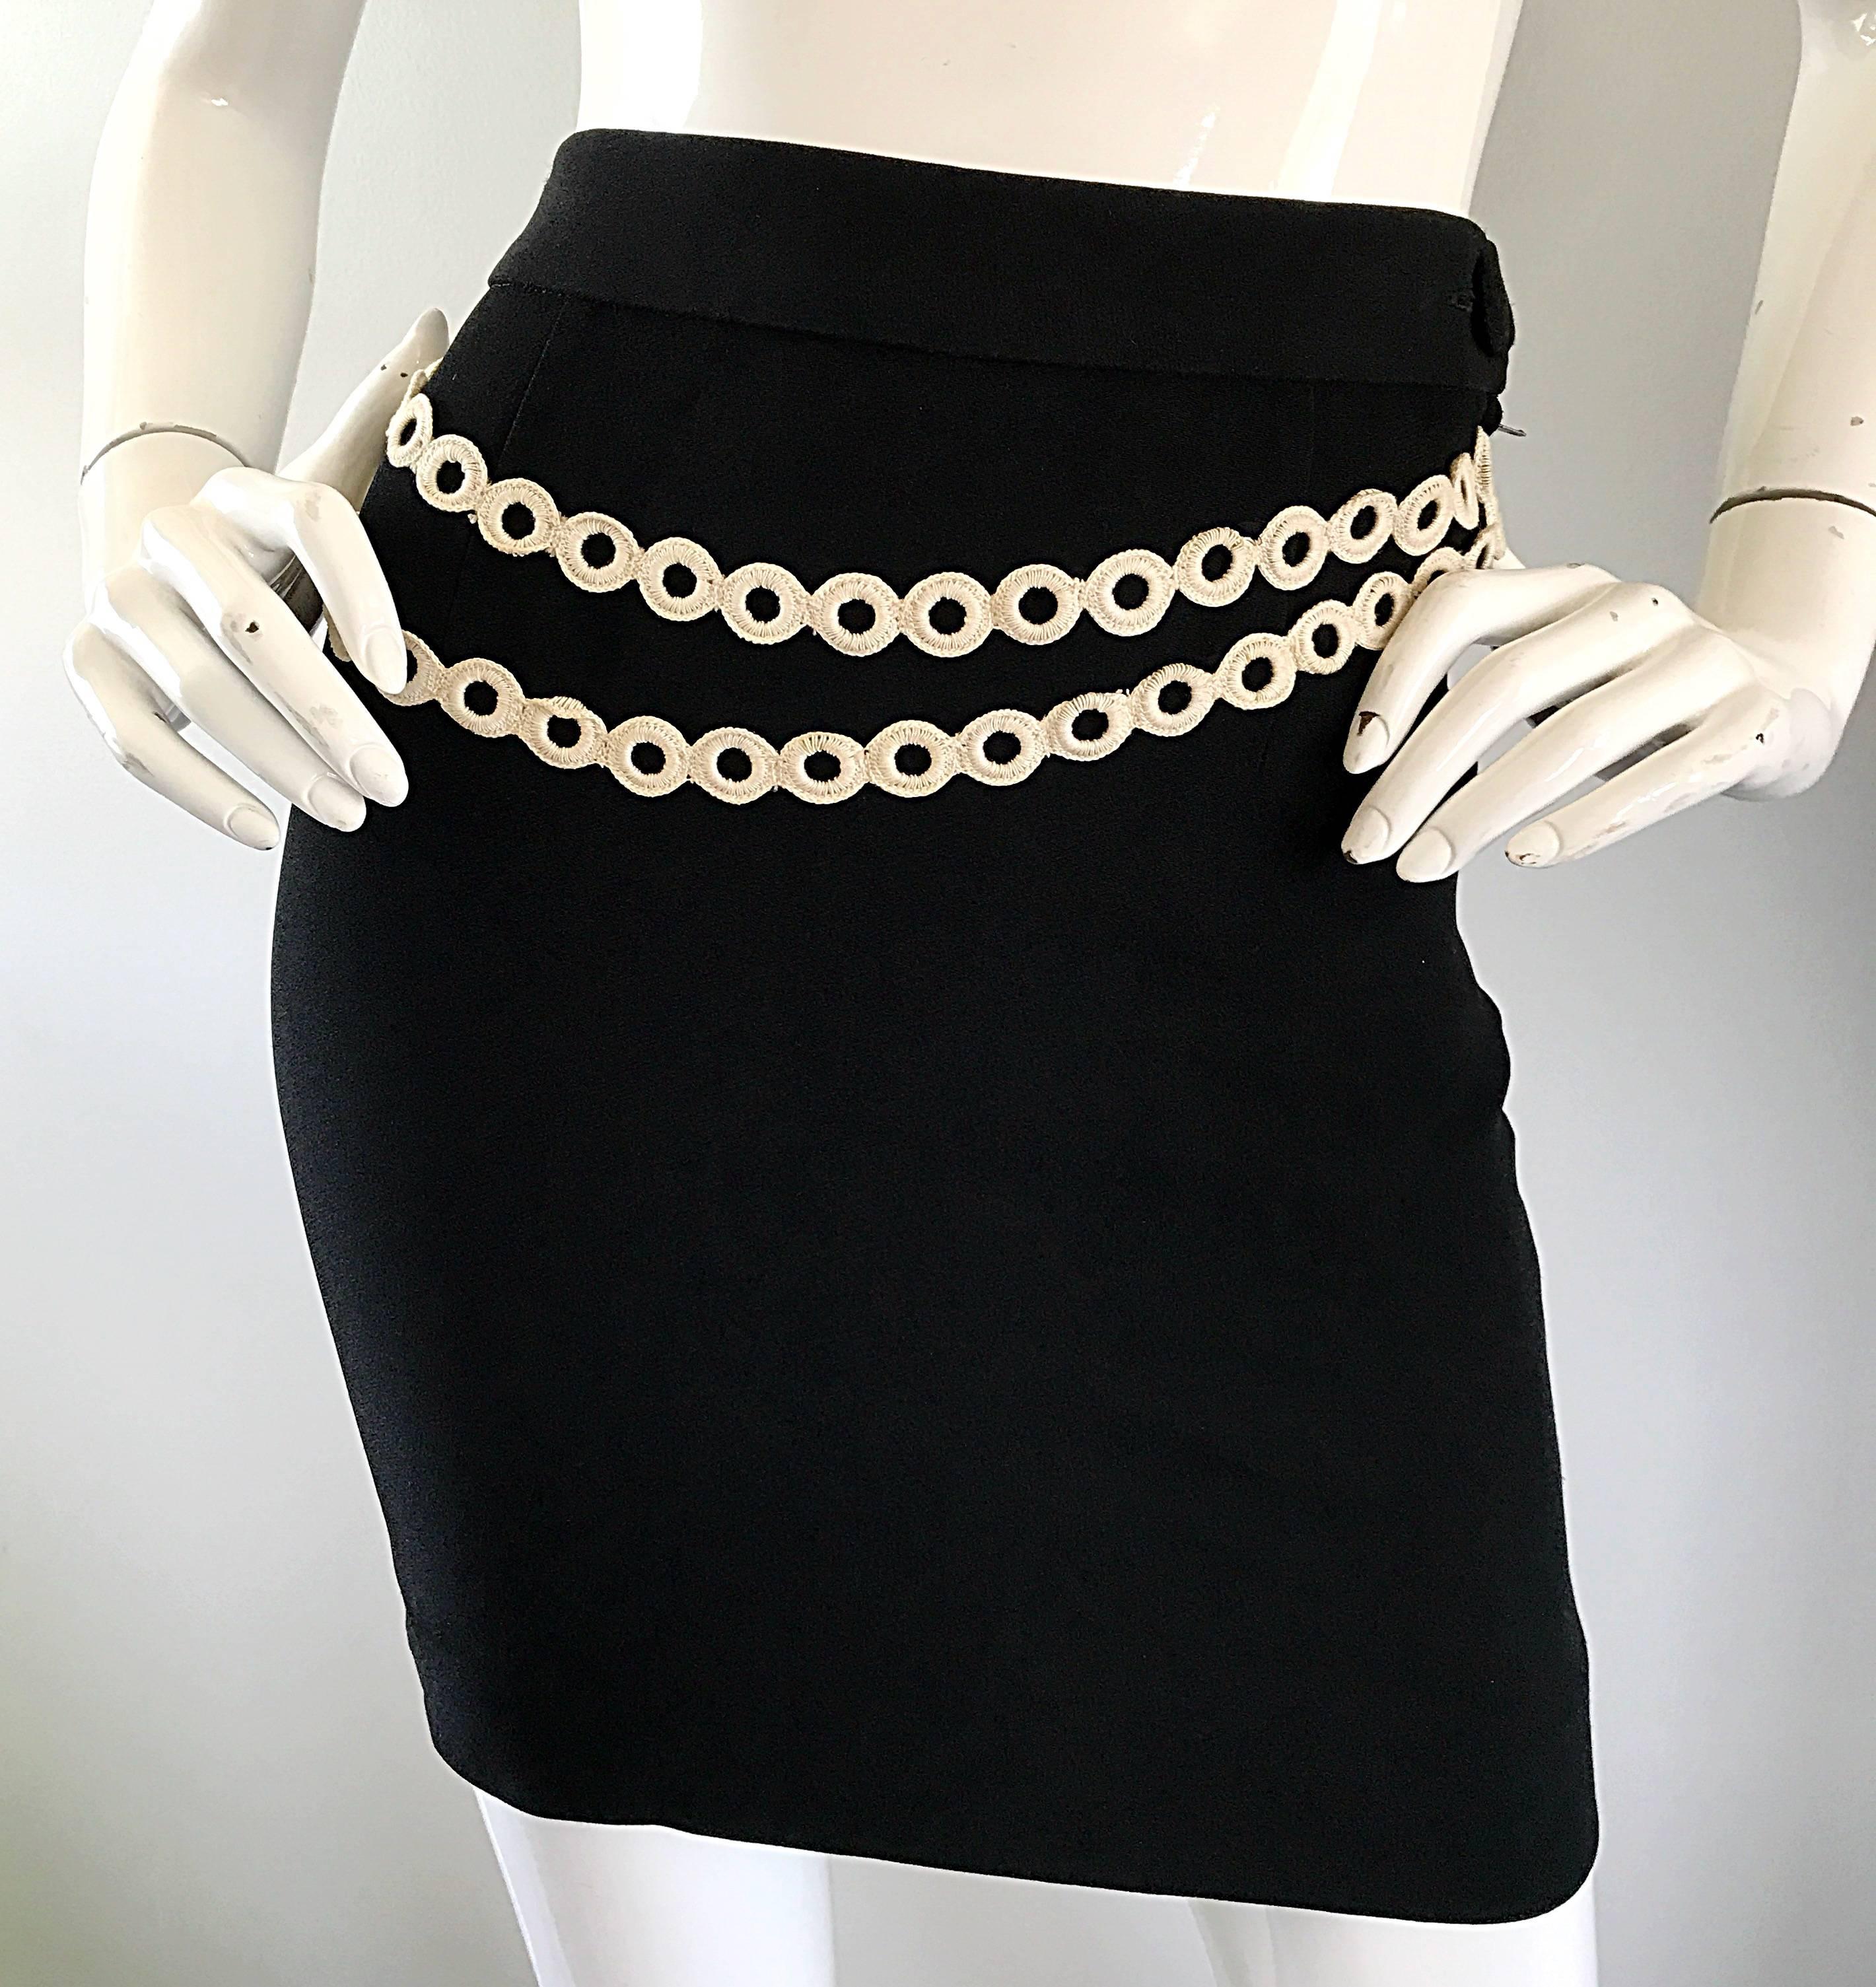 1990s Moschino Cheap and Chic Black and White Trompe l'oeil Vintage Mini Skirt For Sale 4